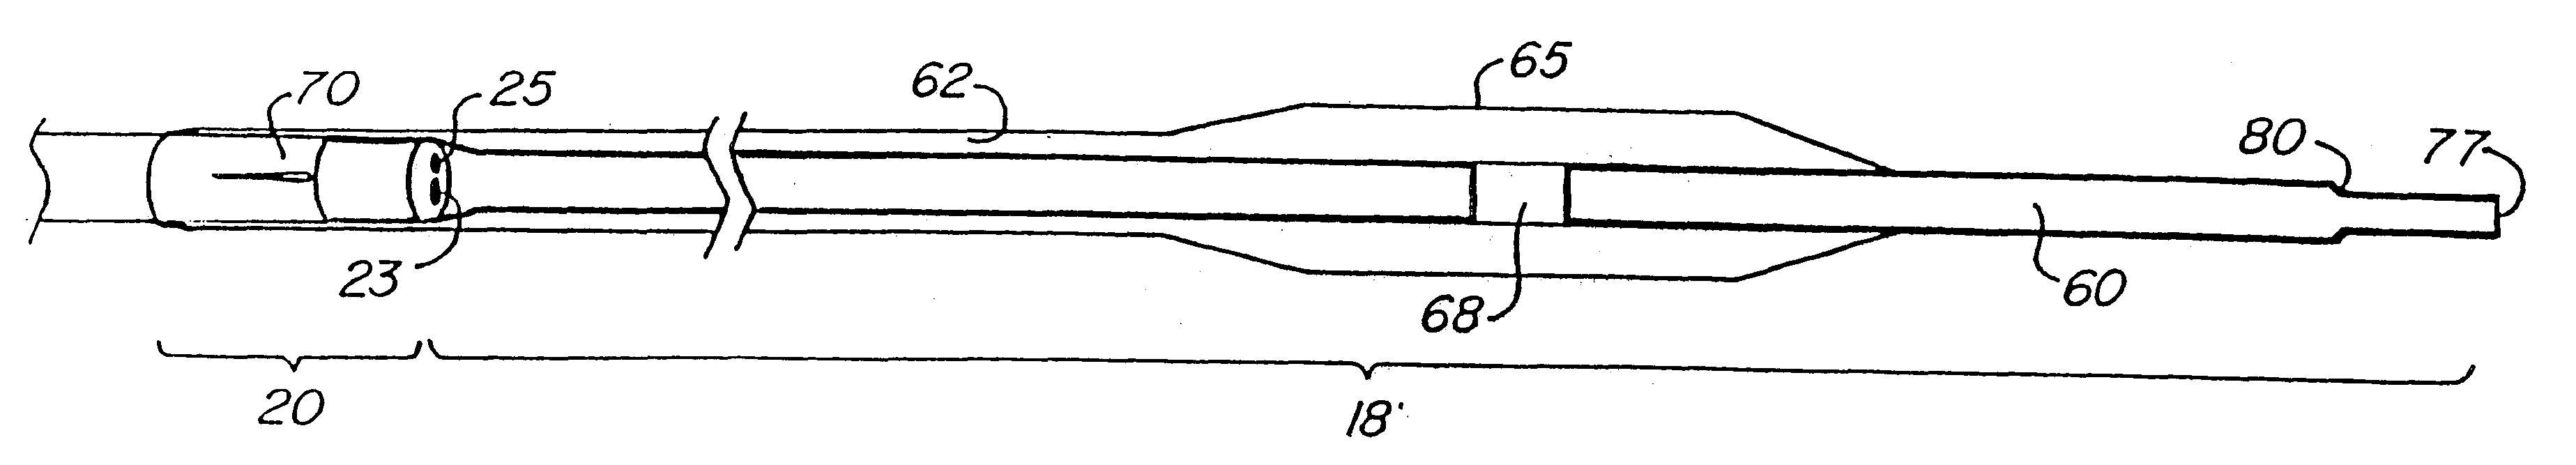 Catheter system having a balloon angioplasty device disposed over a work element lumen